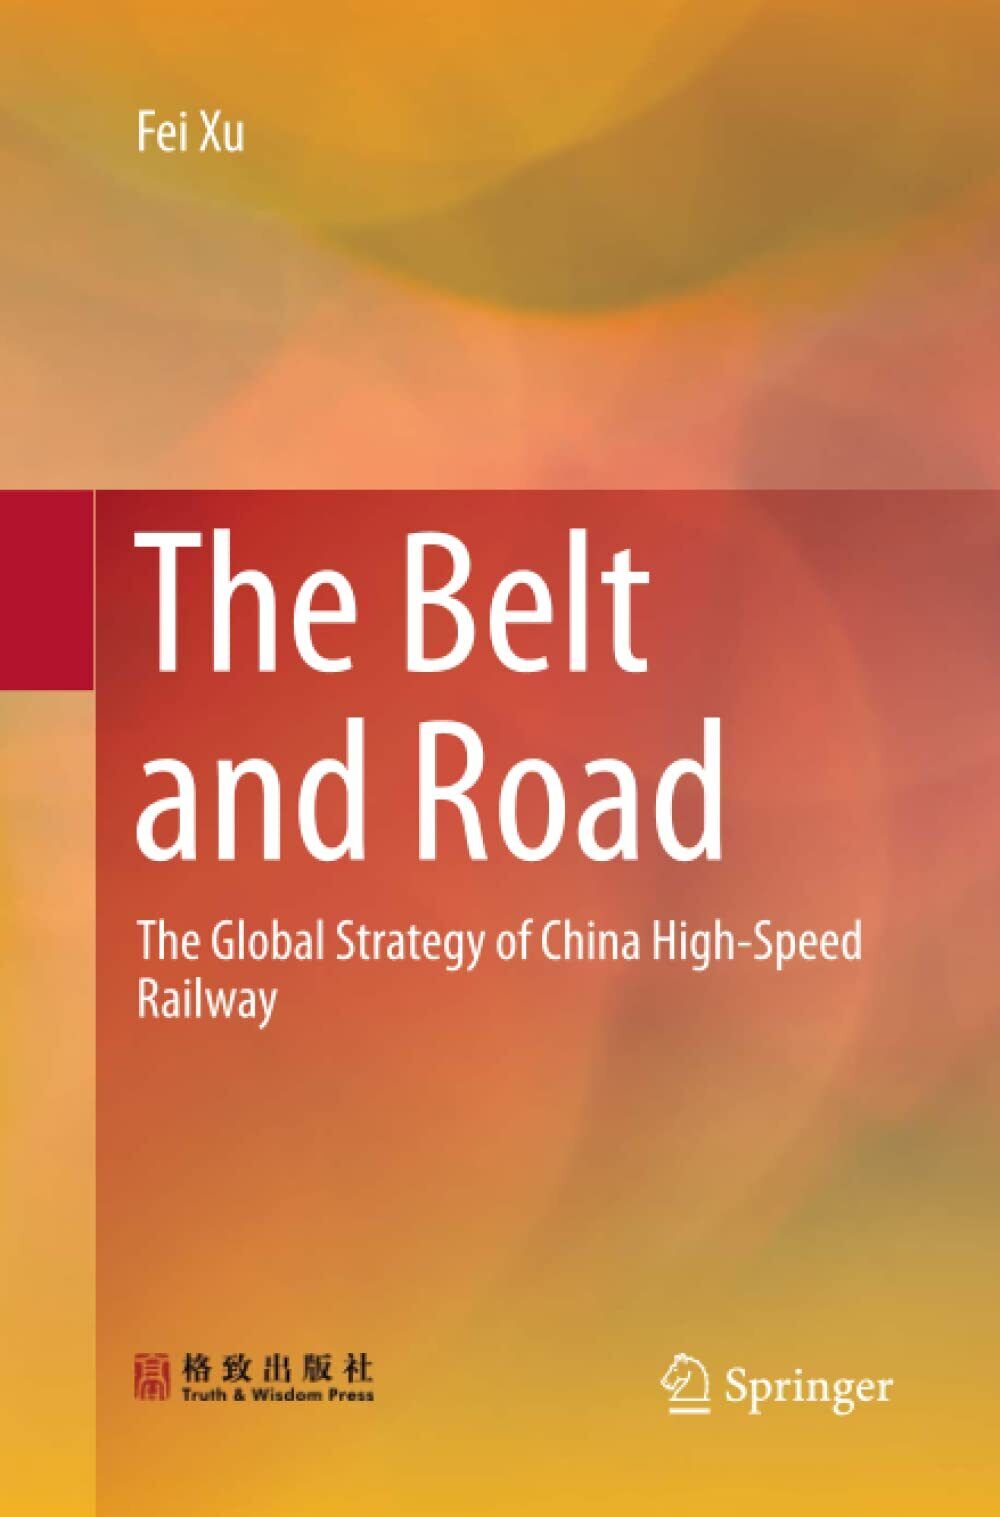 The Belt and Road - Fei Xu - Springer, 2019